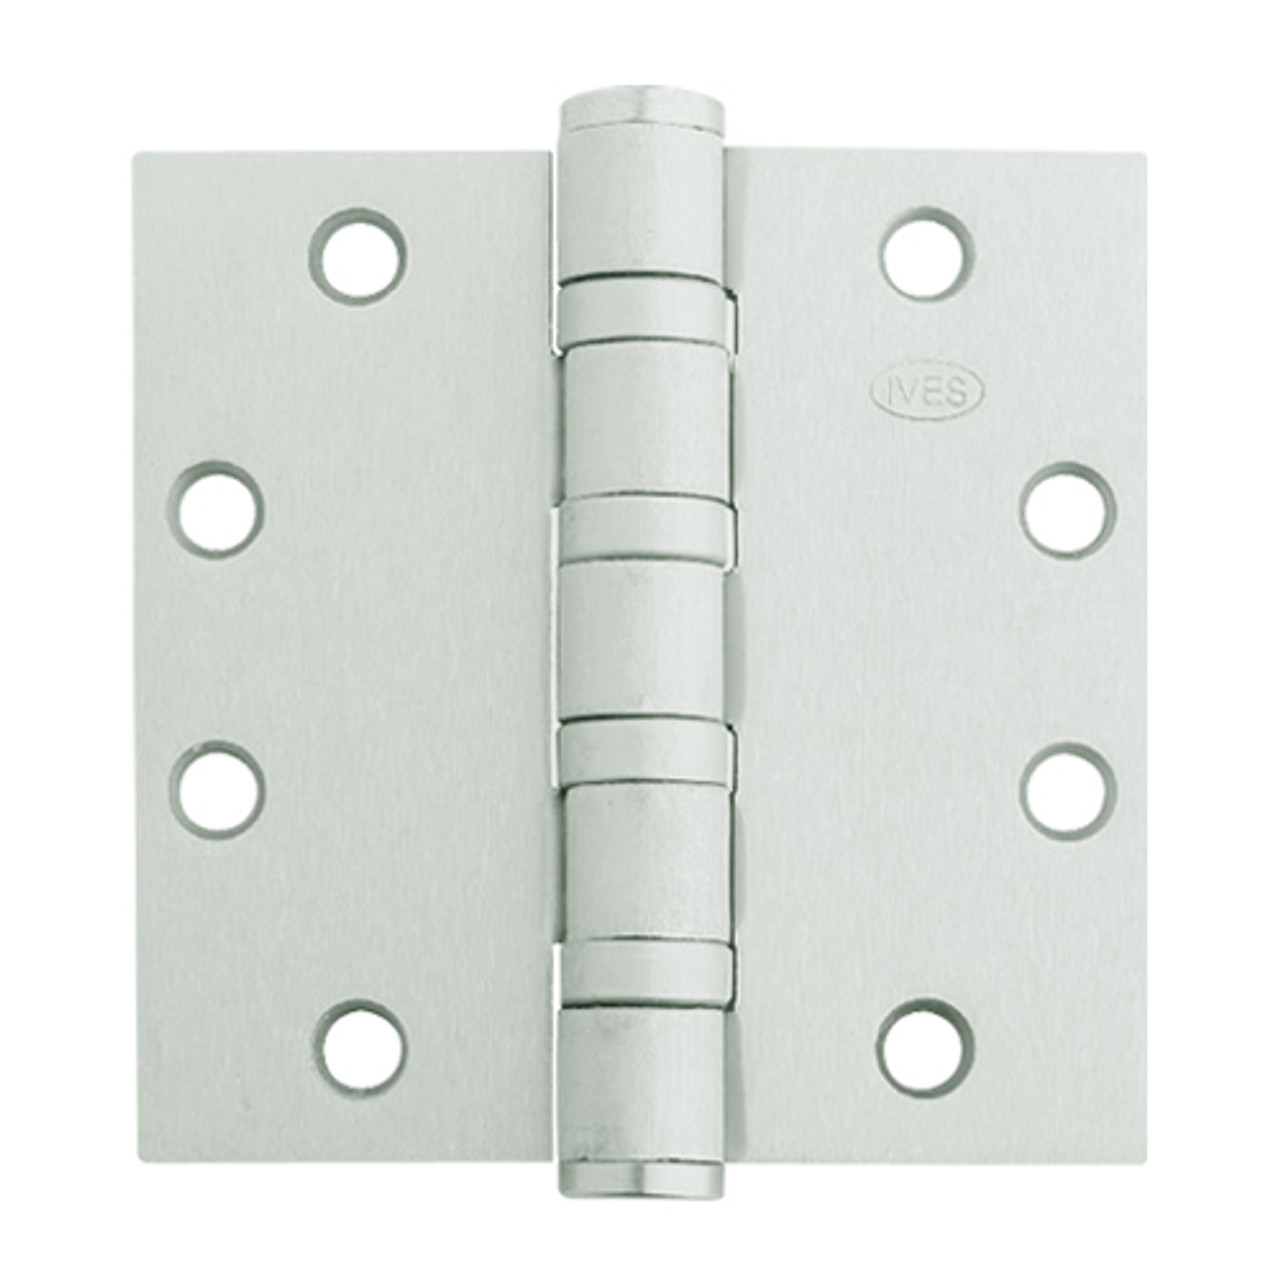 5BB1HW-4-5x4-619-TW8 IVES 5 Knuckle Ball Bearing Full Mortise Hinge with Electric Thru-Wire in Satin Nickel